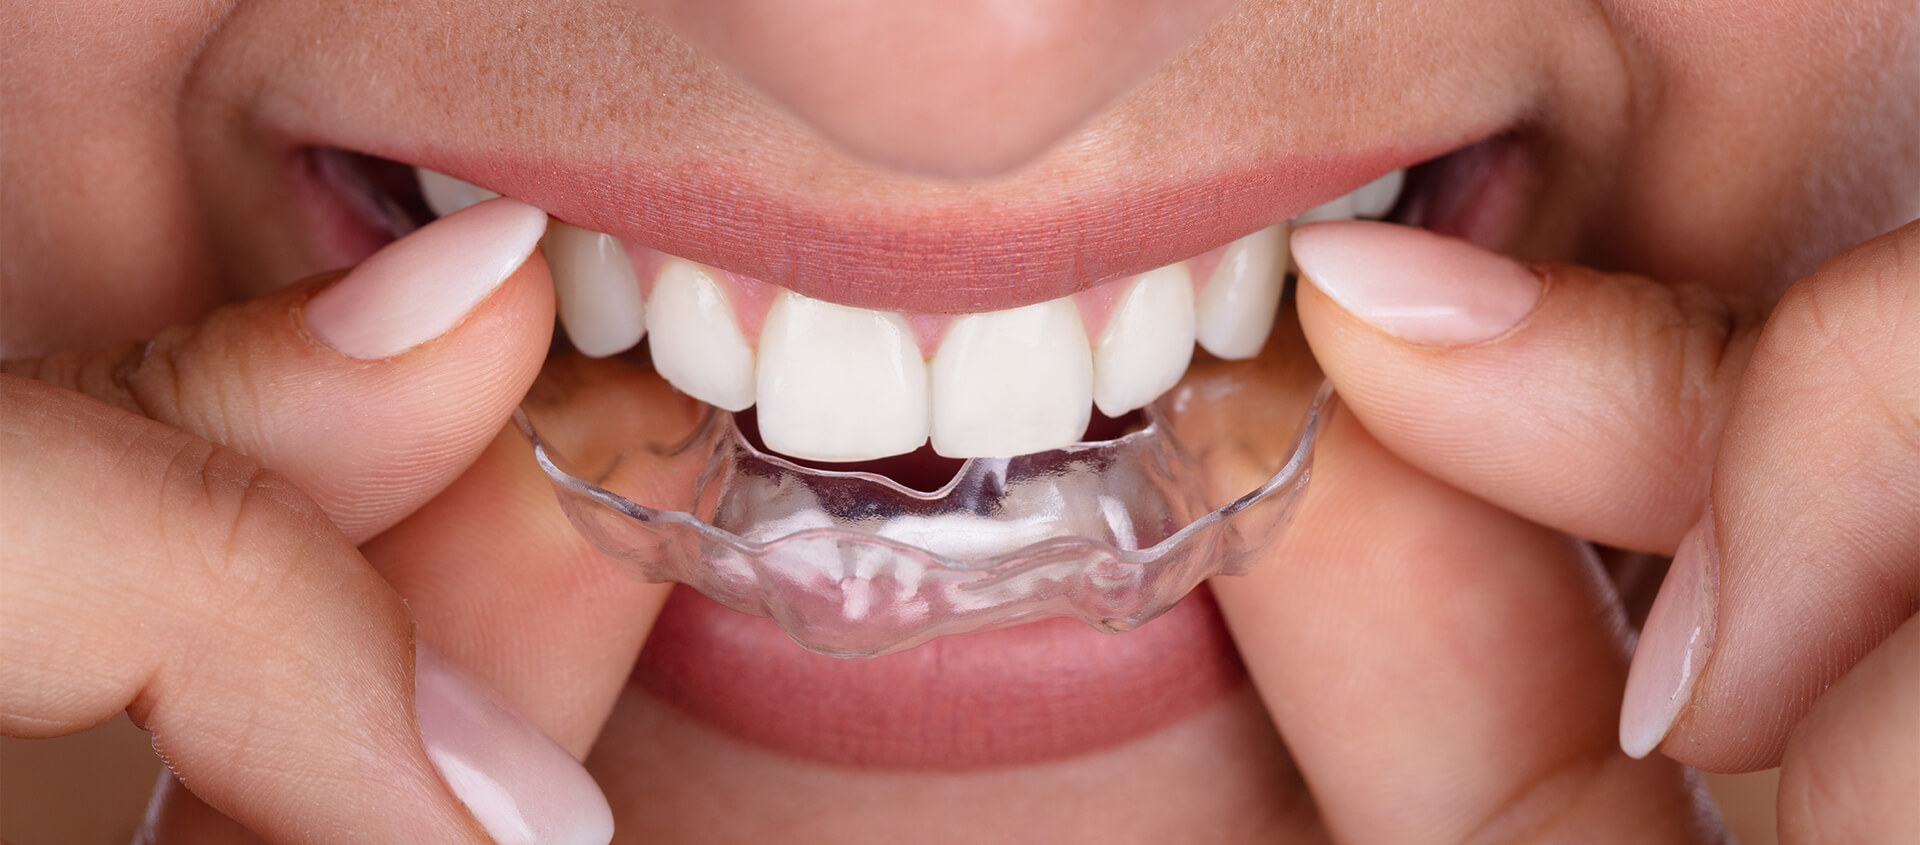 Orthodontics / Invisible / Clear Braces - Dr. Shukla's Dent Care